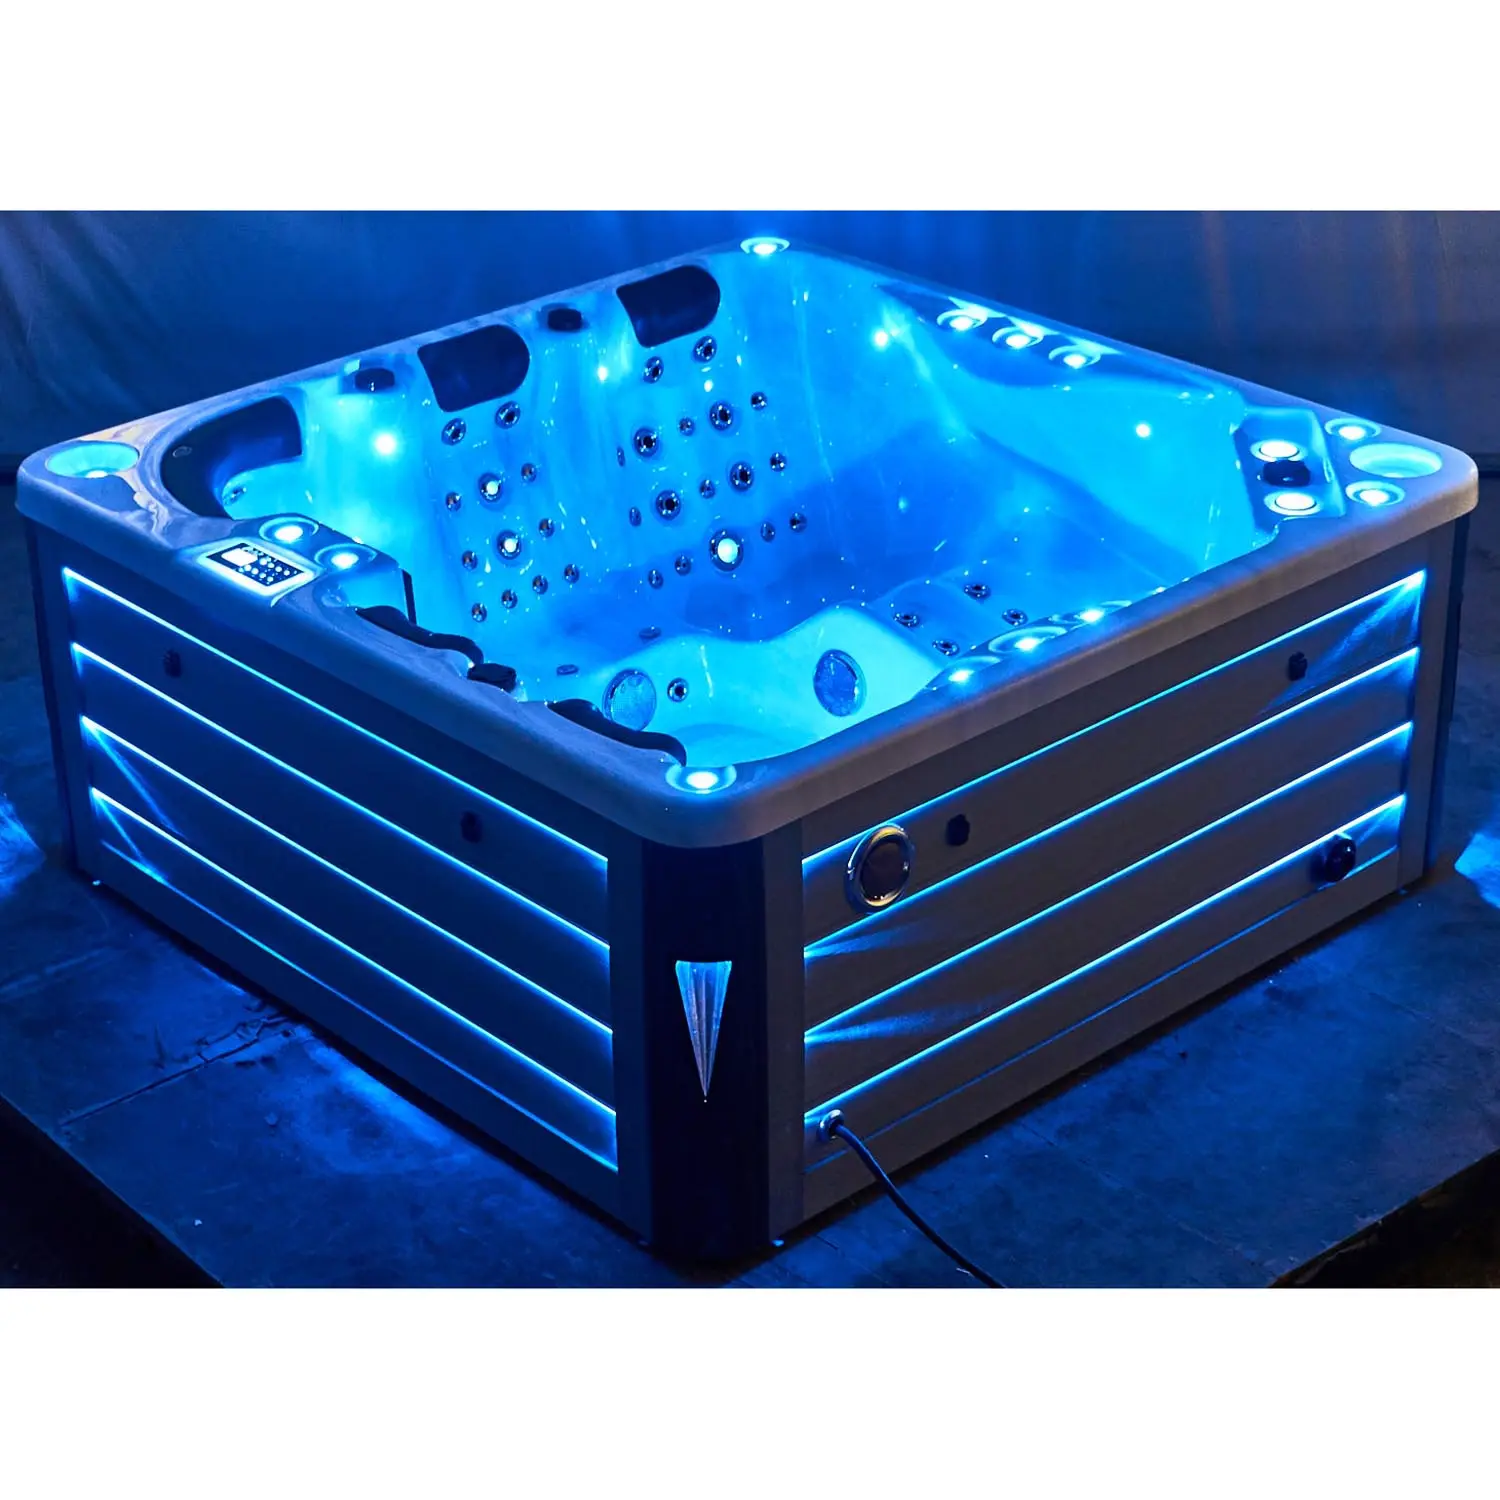 Garden Luxury Relax Hot Tub Spa 5 Person Outdoor Hot Tub Whirlpool bathtub with Music